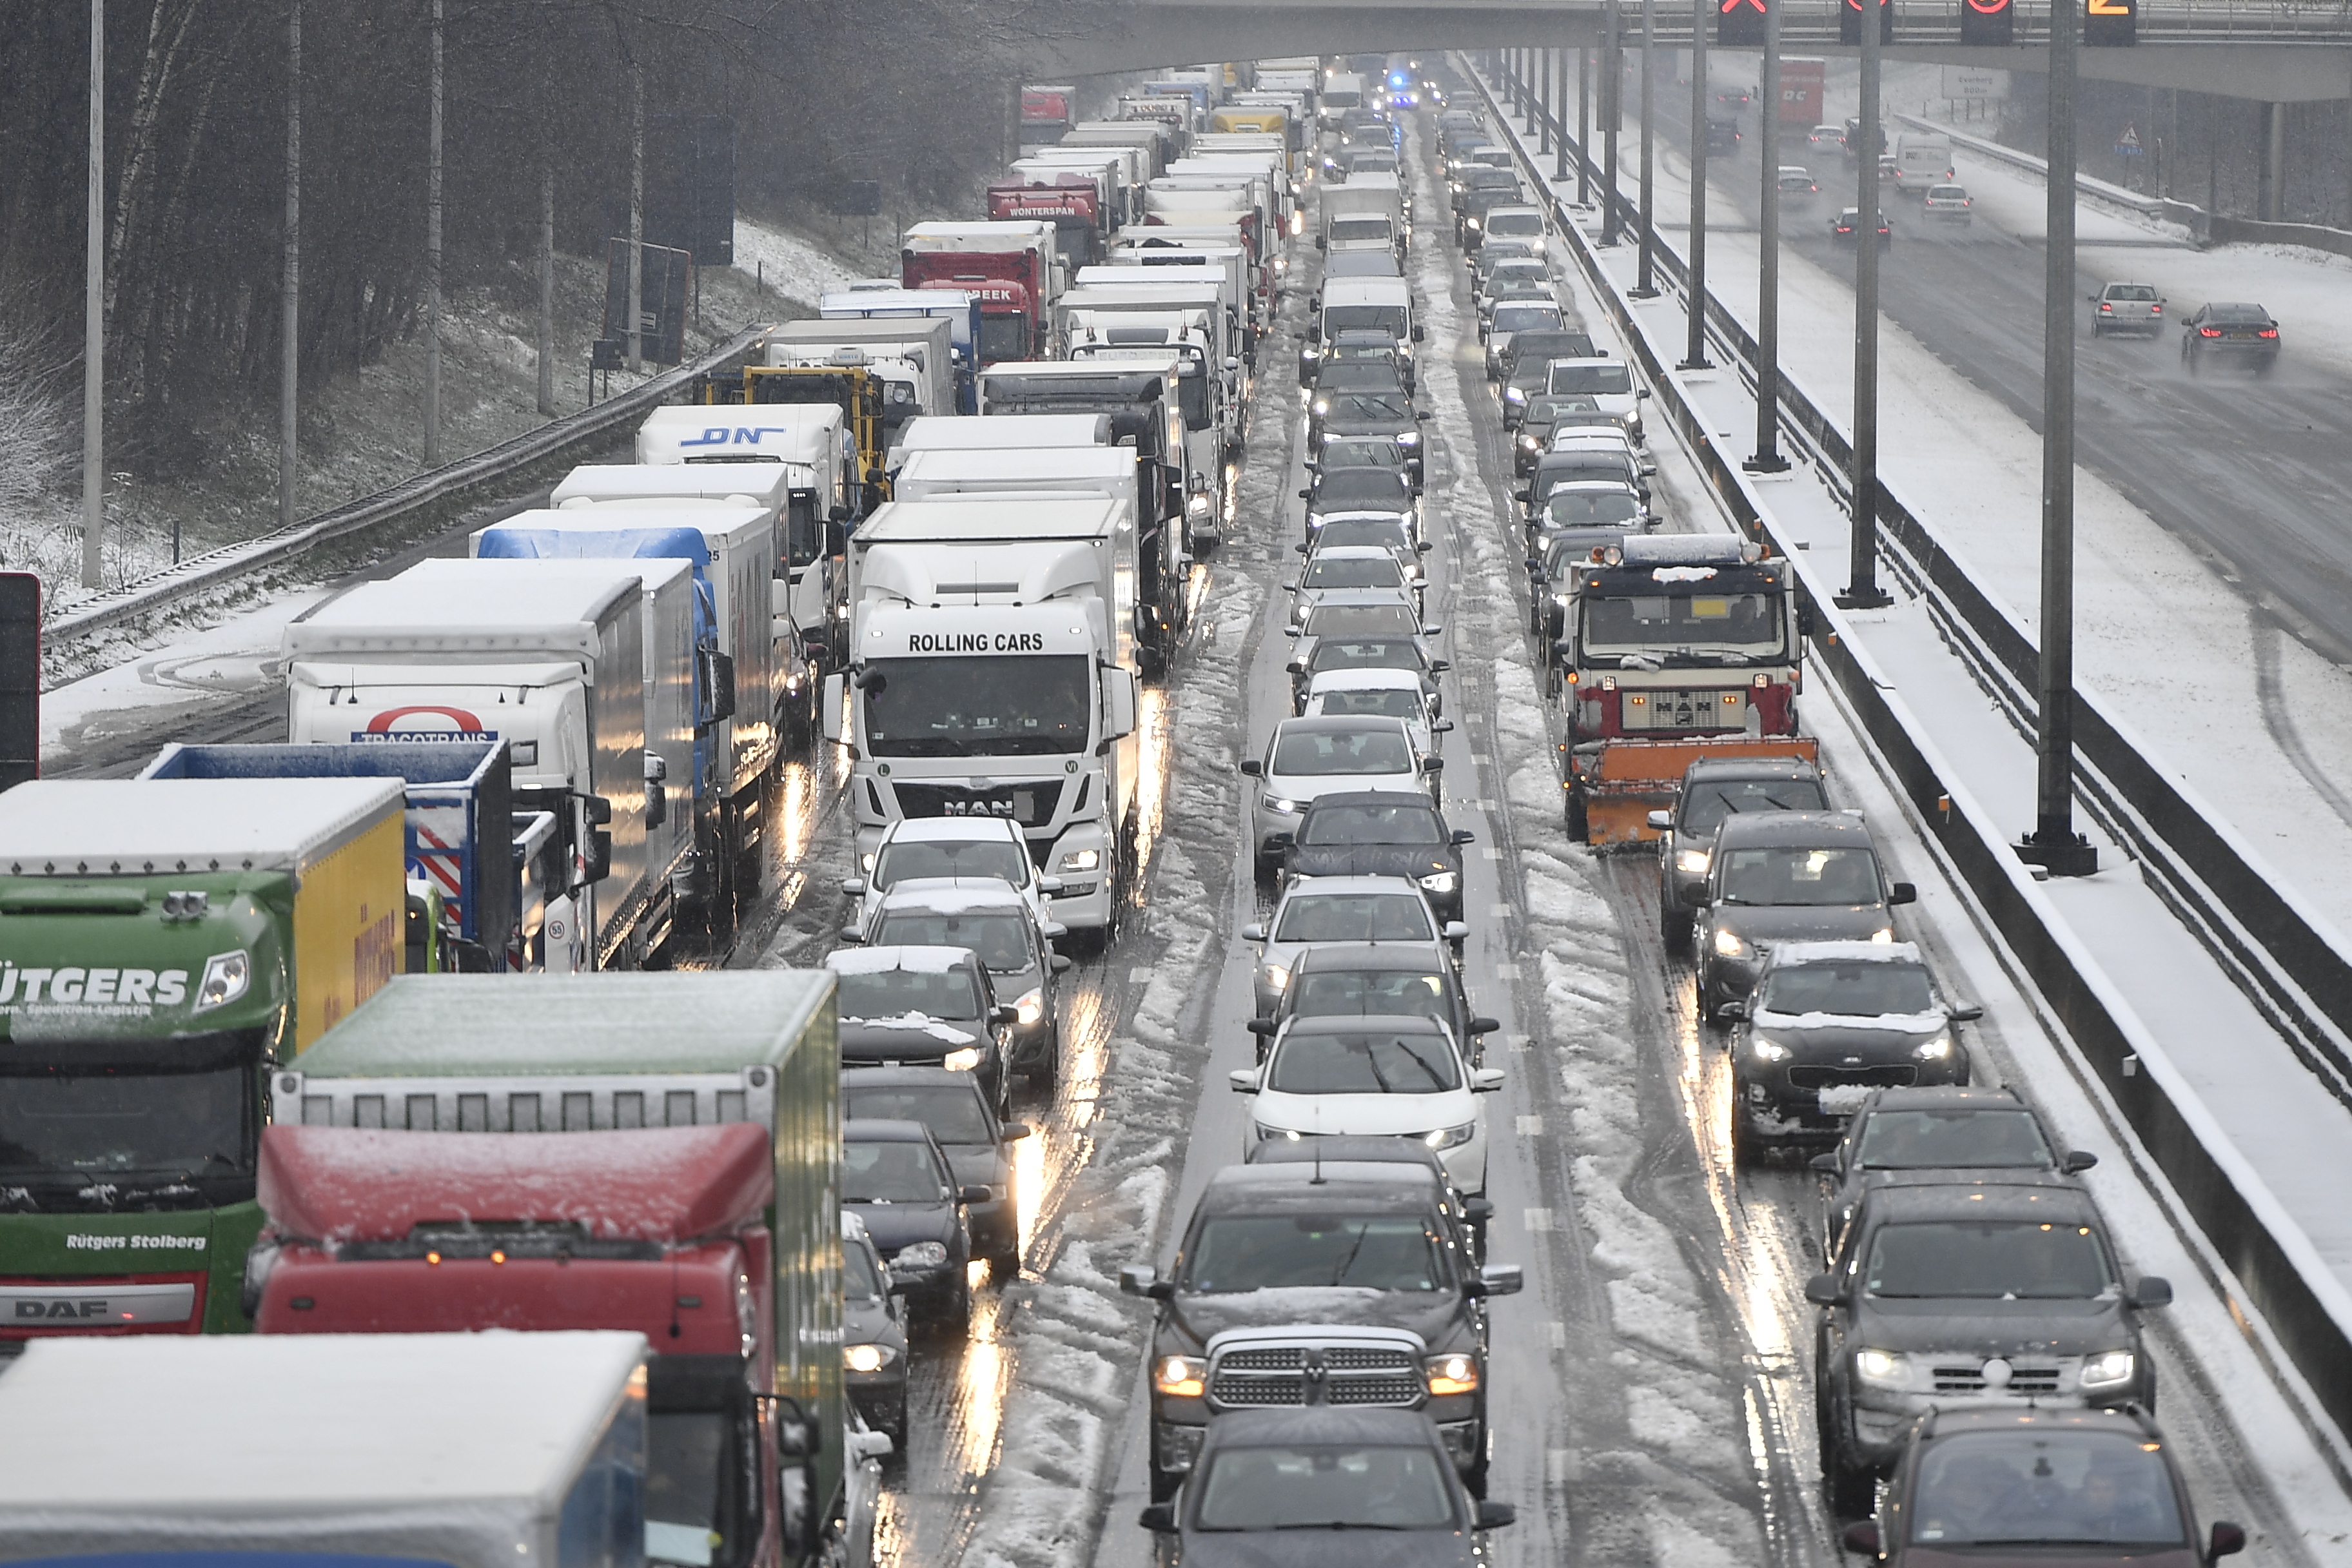 Belgians drove new record of 84,3 billion km by car